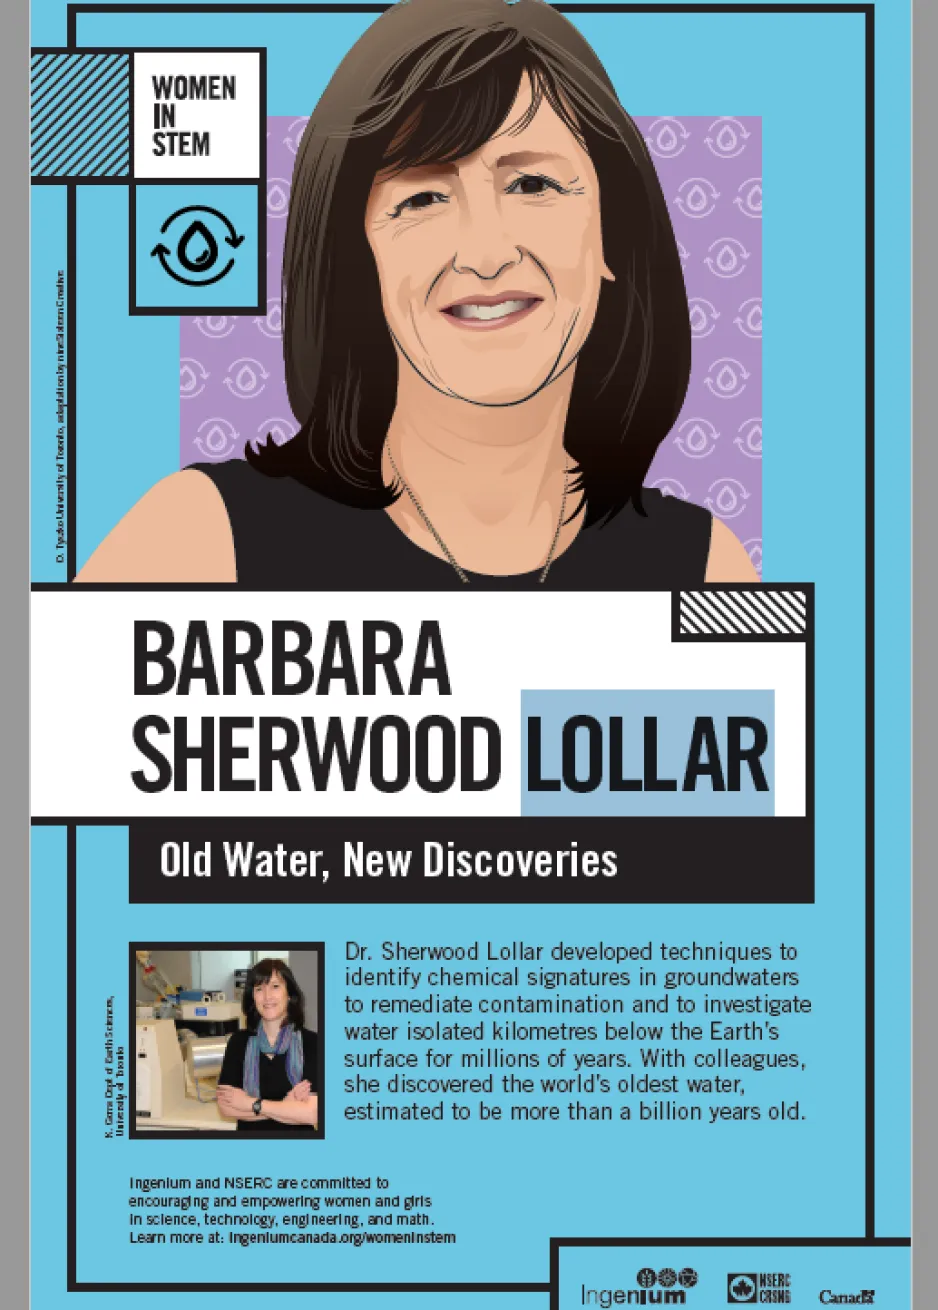 A graphical drawing of a woman, set on a blue background. The text reads: “Barbara Sherwood Lollar: Old Water, New Discoveries.”